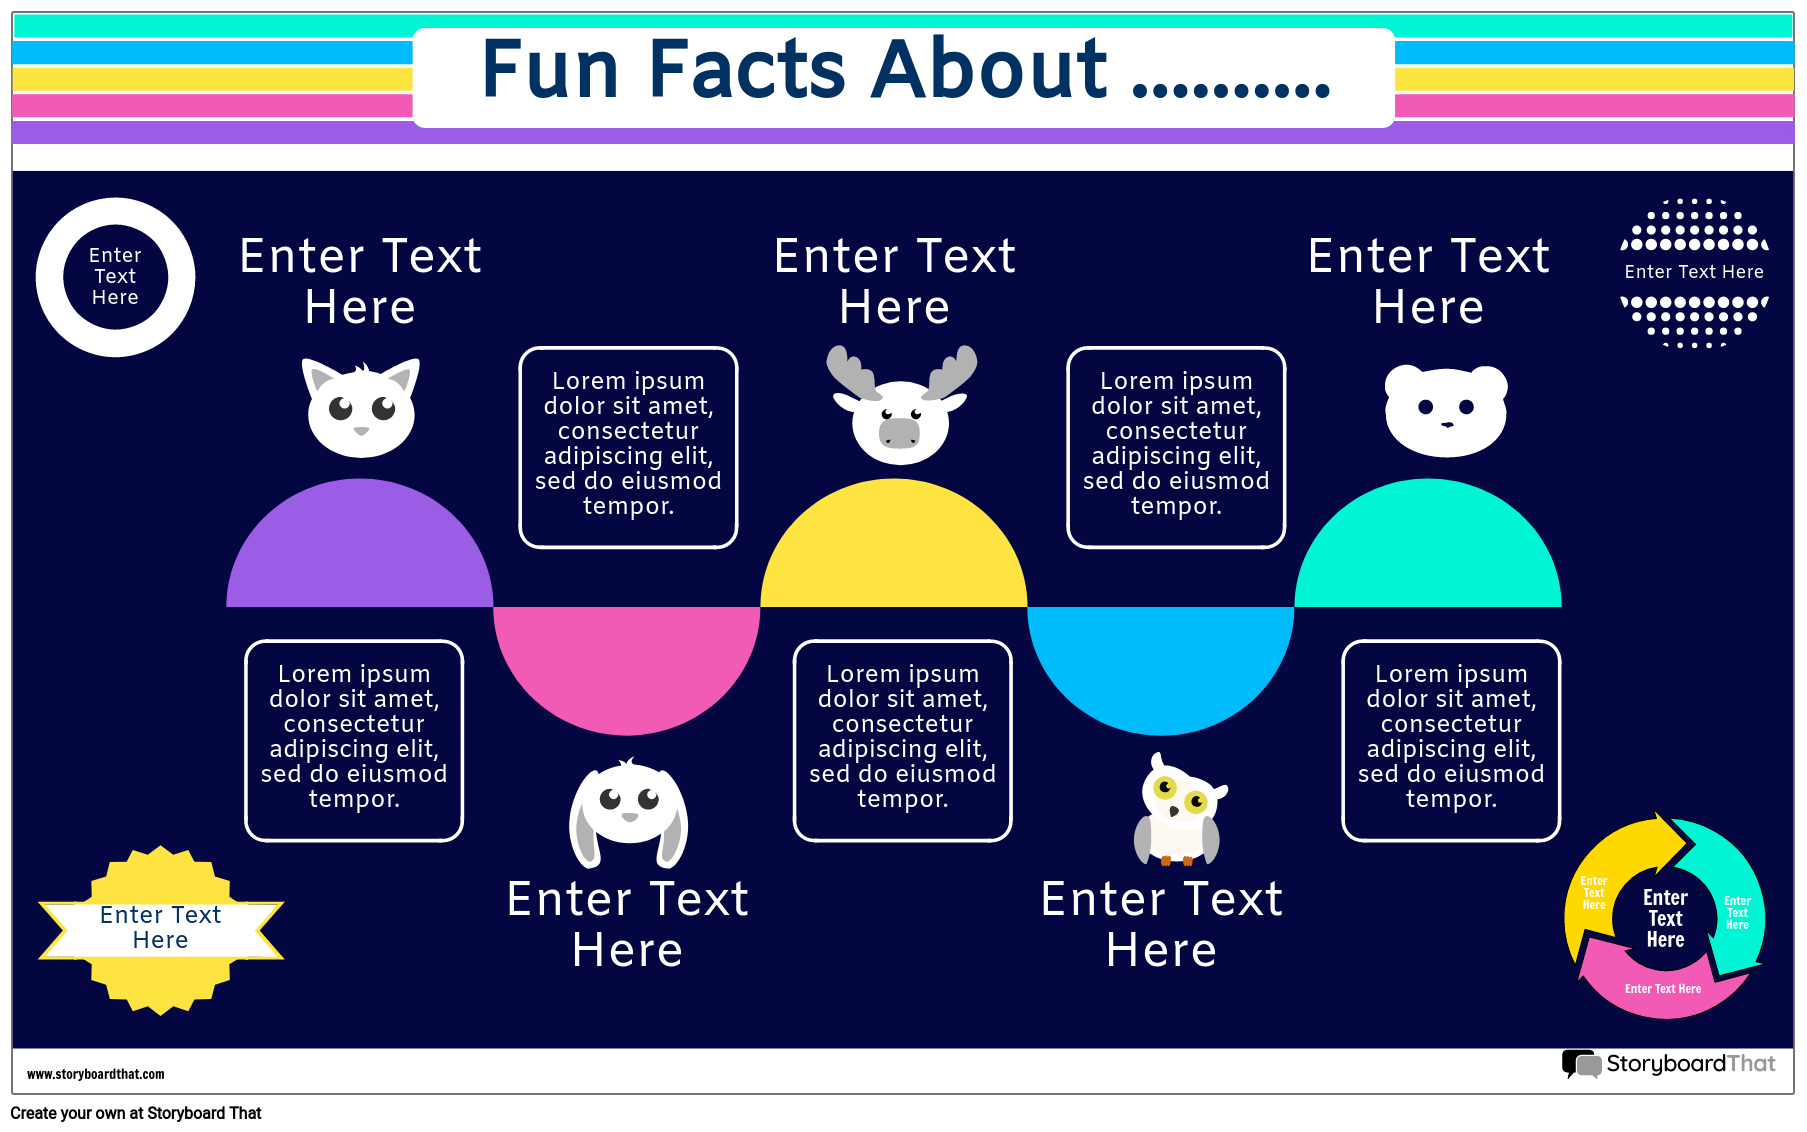 Fun Facts Infographic 2